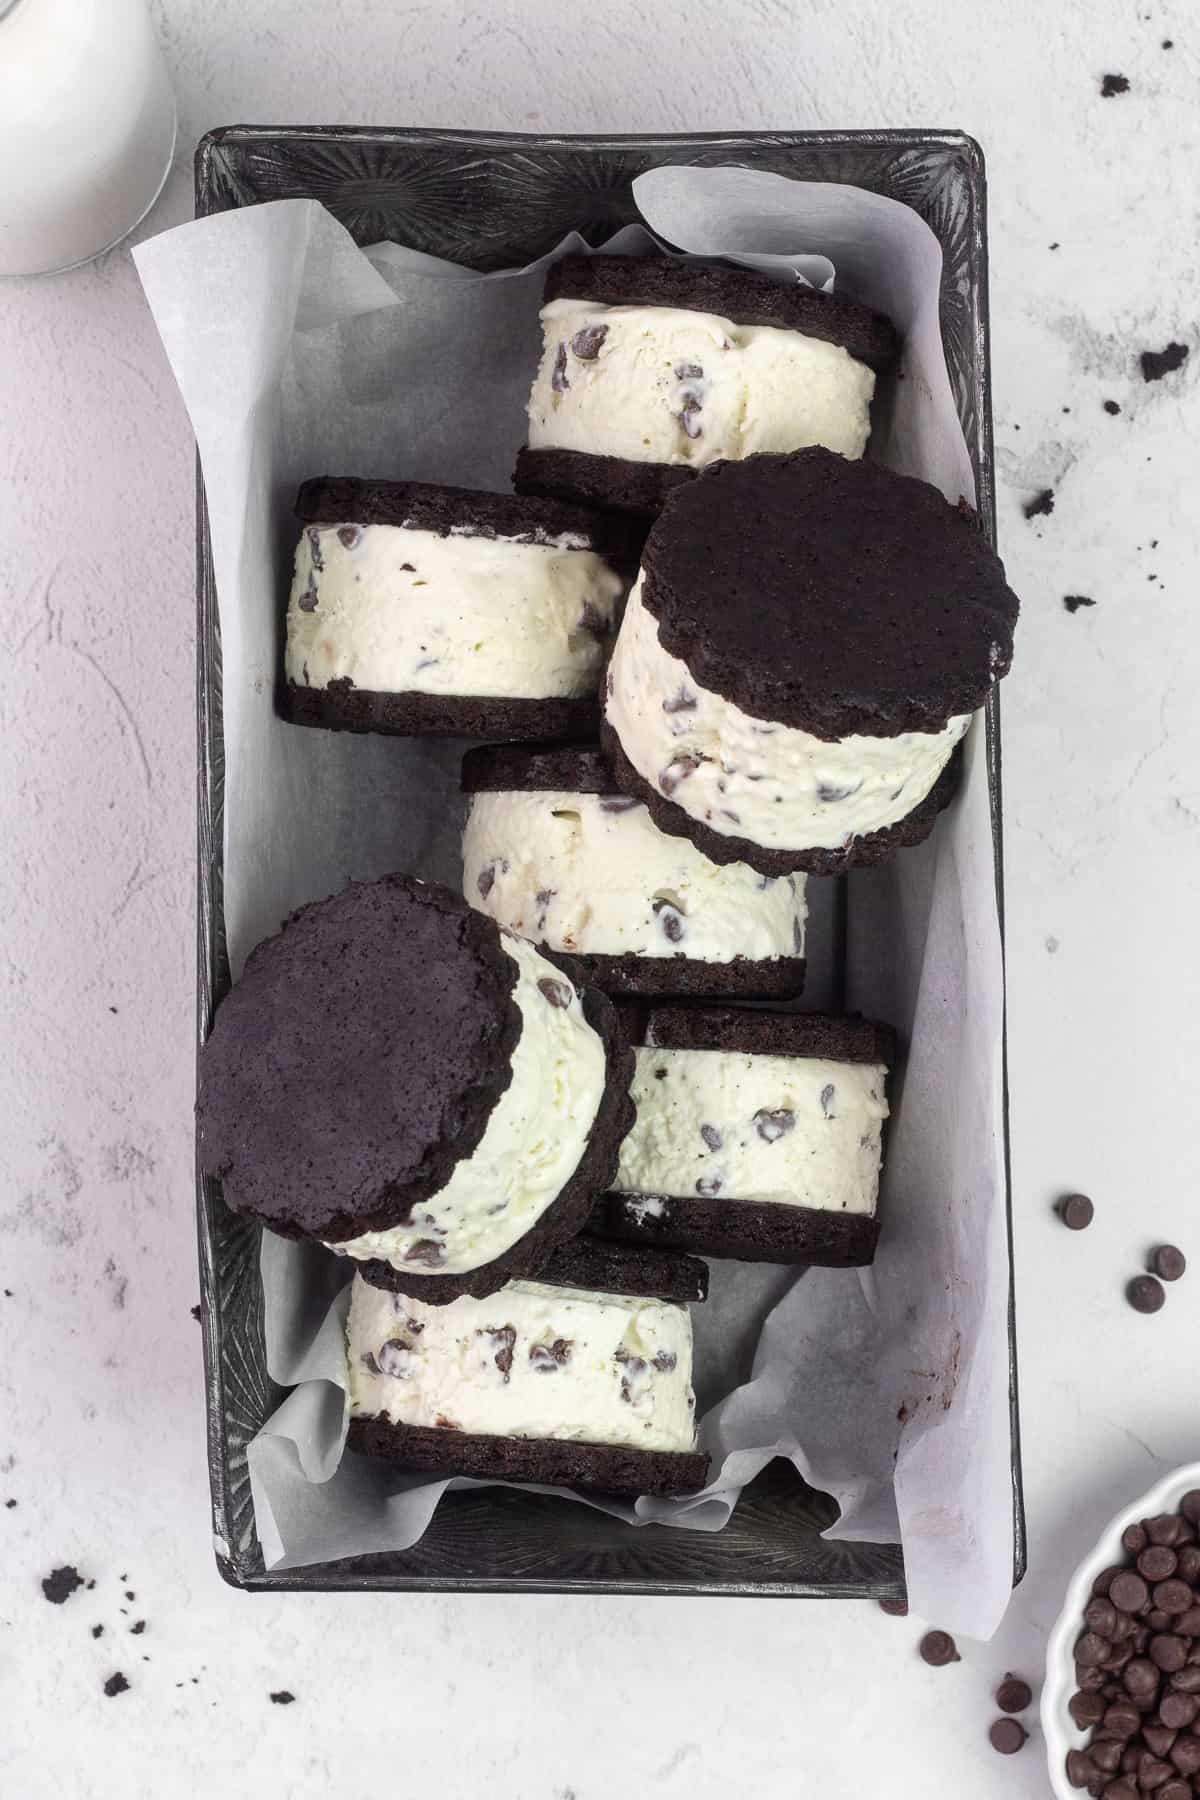 Mint Chocolate Chip Ice Cream Sandwiches in a loaf pan